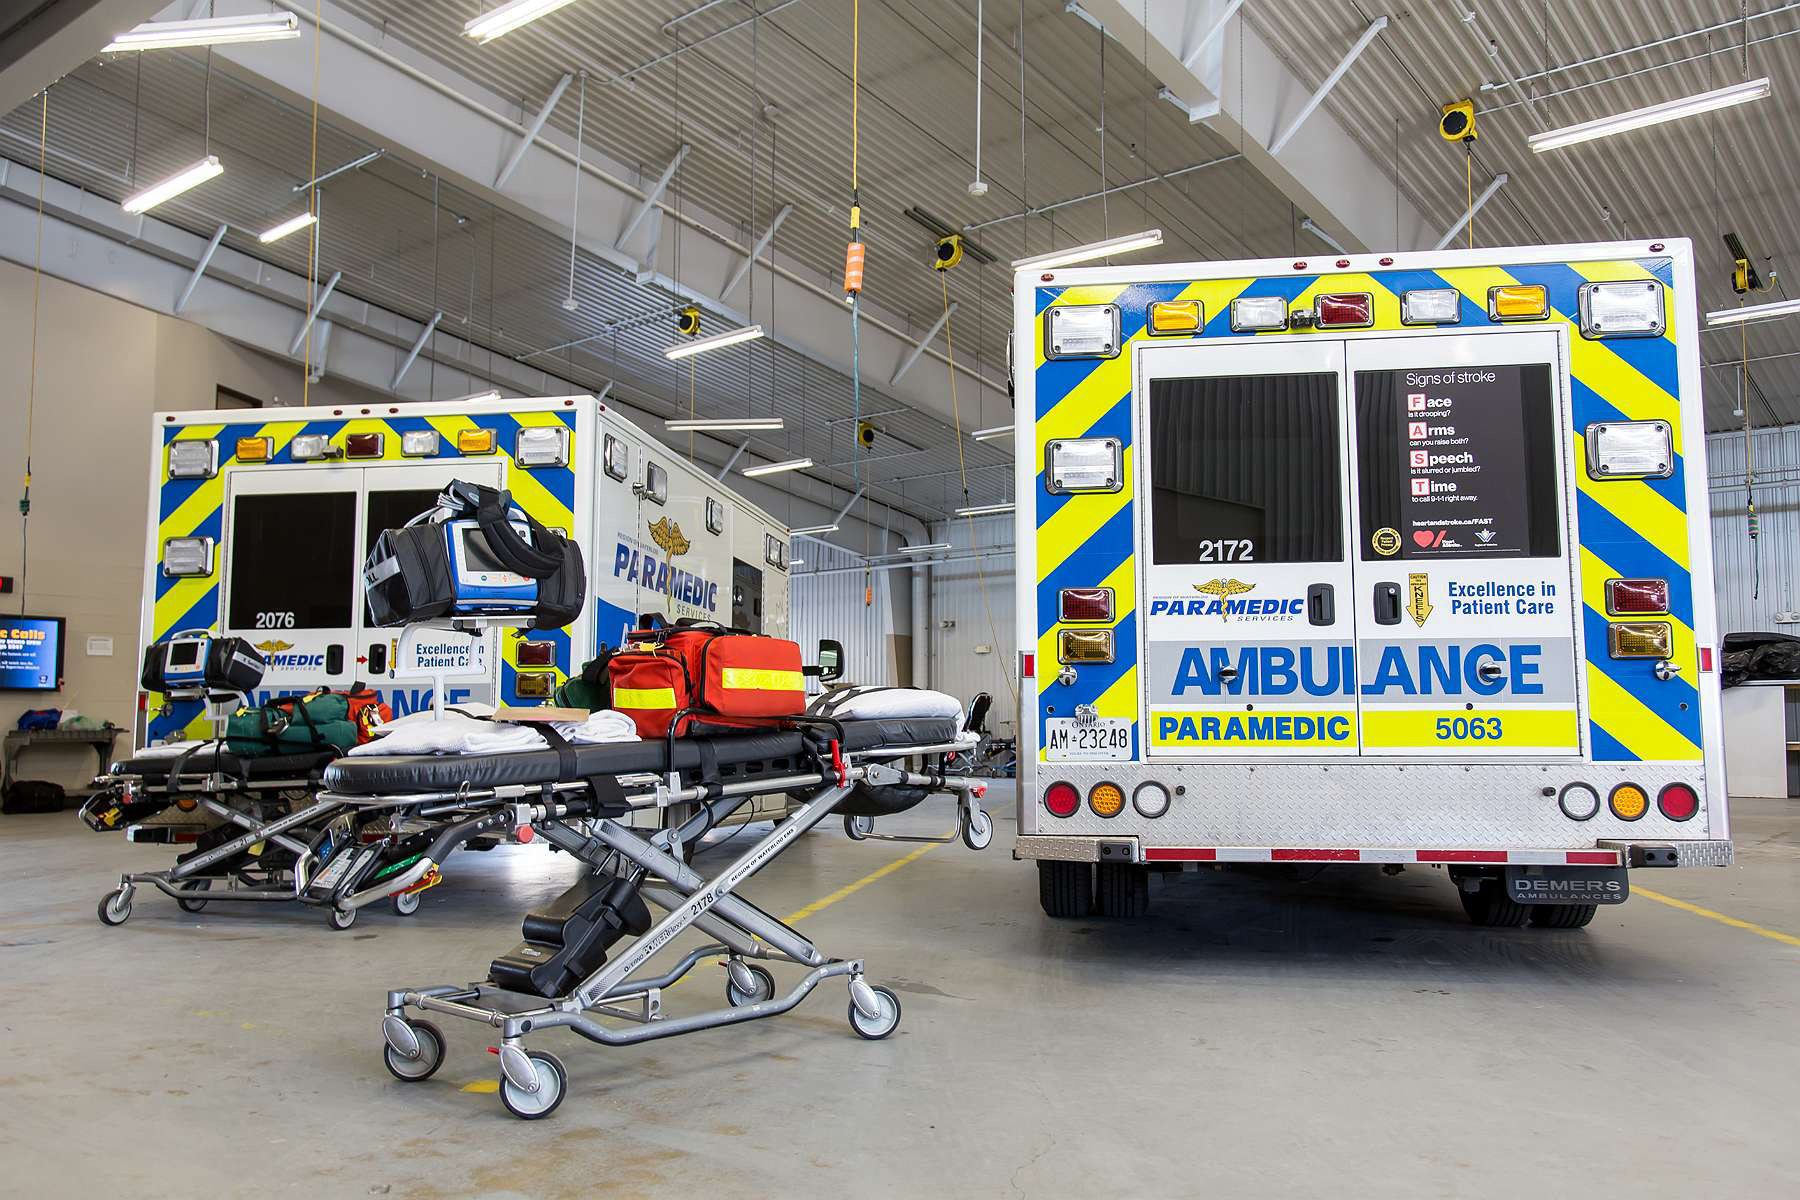 an image of two ambulances and a stretcher